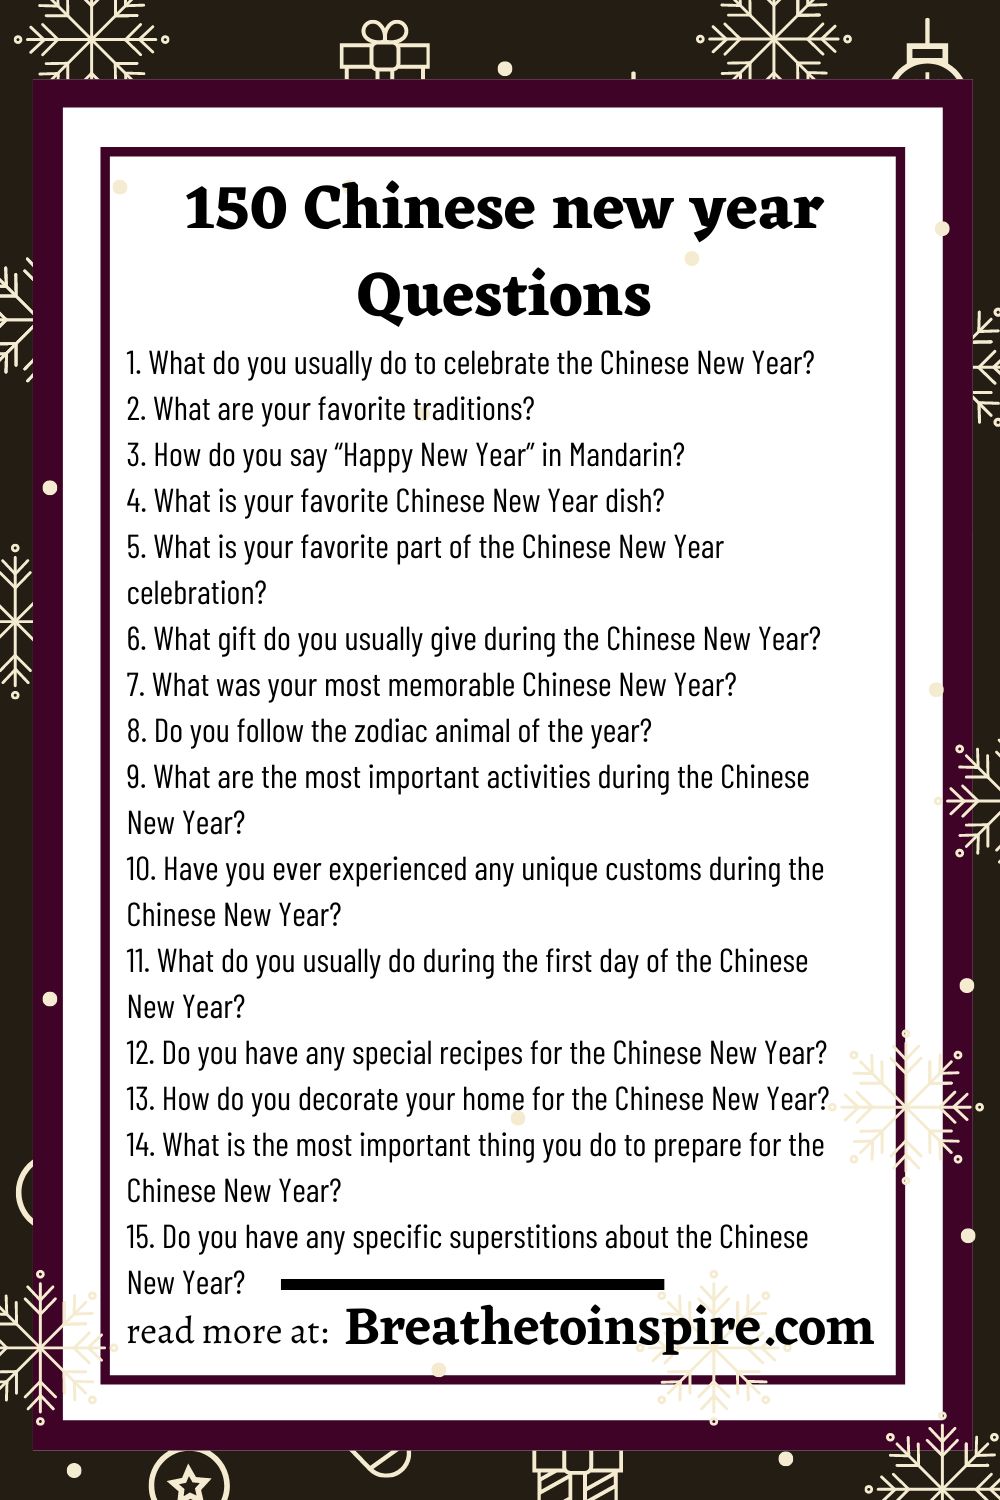 150 Chinese New Year Questions To Ask As Icebreakers And Conversation